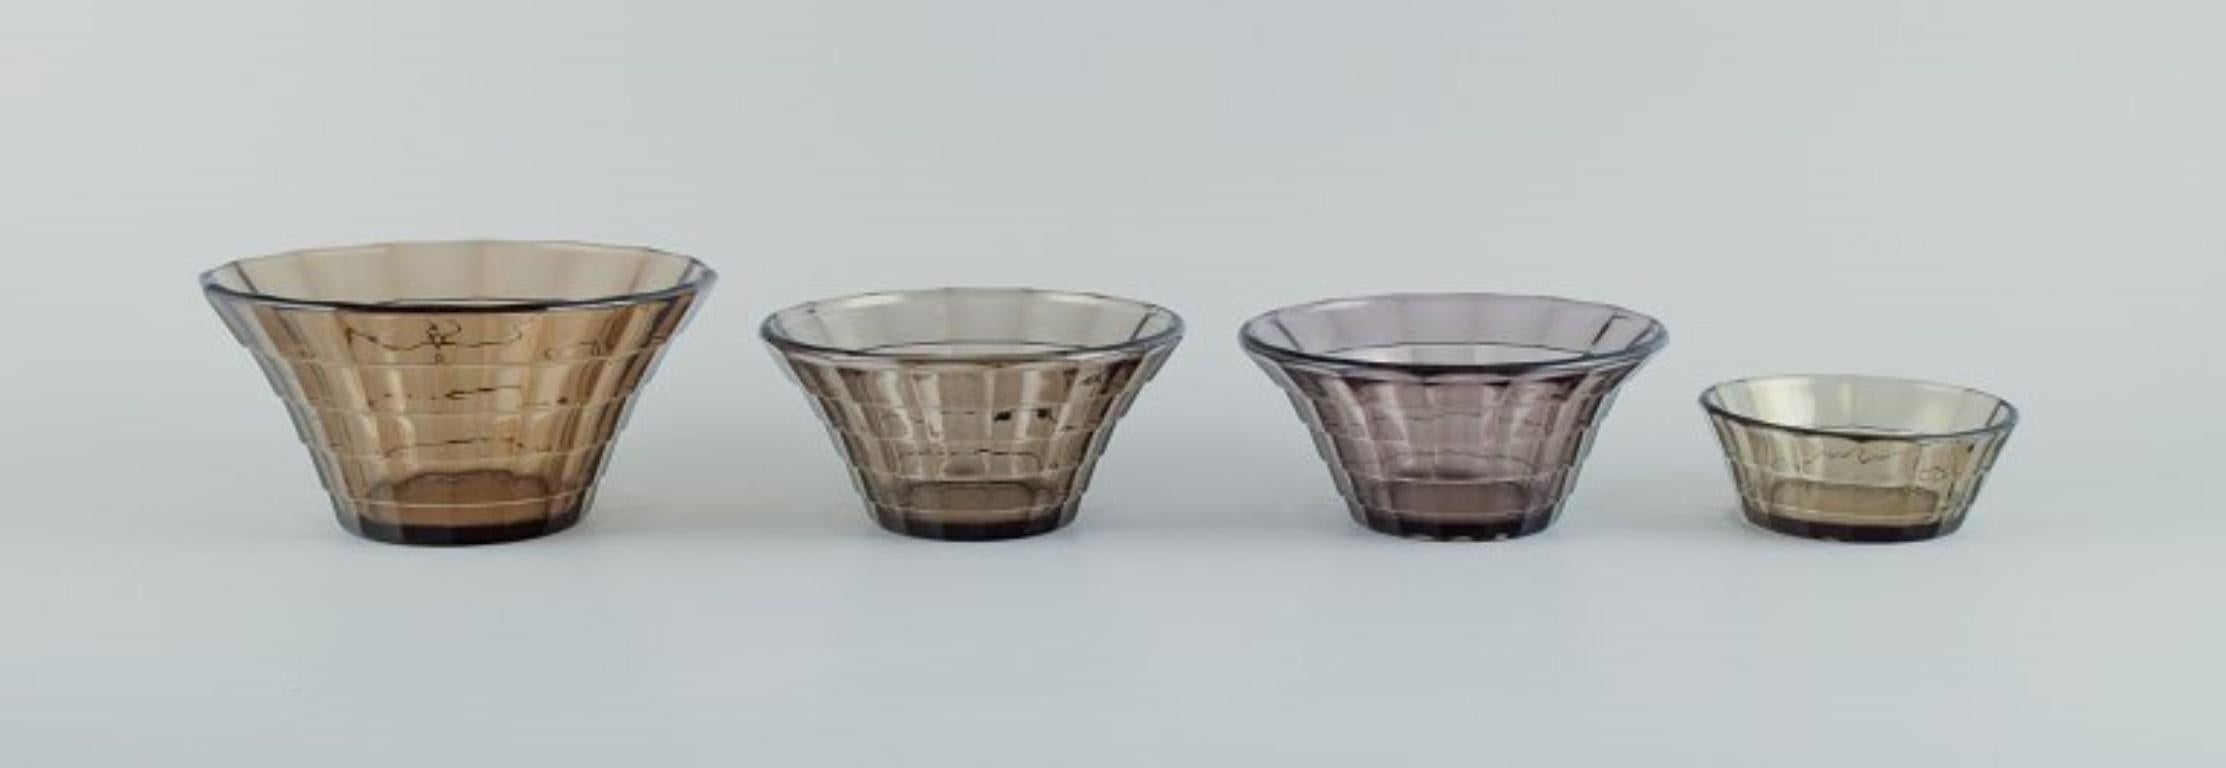 Simon Gate (1883-1945) for Orrefors/Sandvik, Sweden.
Set of four Art Deco bowls in smoked-coloured pressed glass.
Model G756.
Approximately from 1940.
In perfect condition.
Largest bowl measures: D 16.0 cm. x H 8.0 cm.
